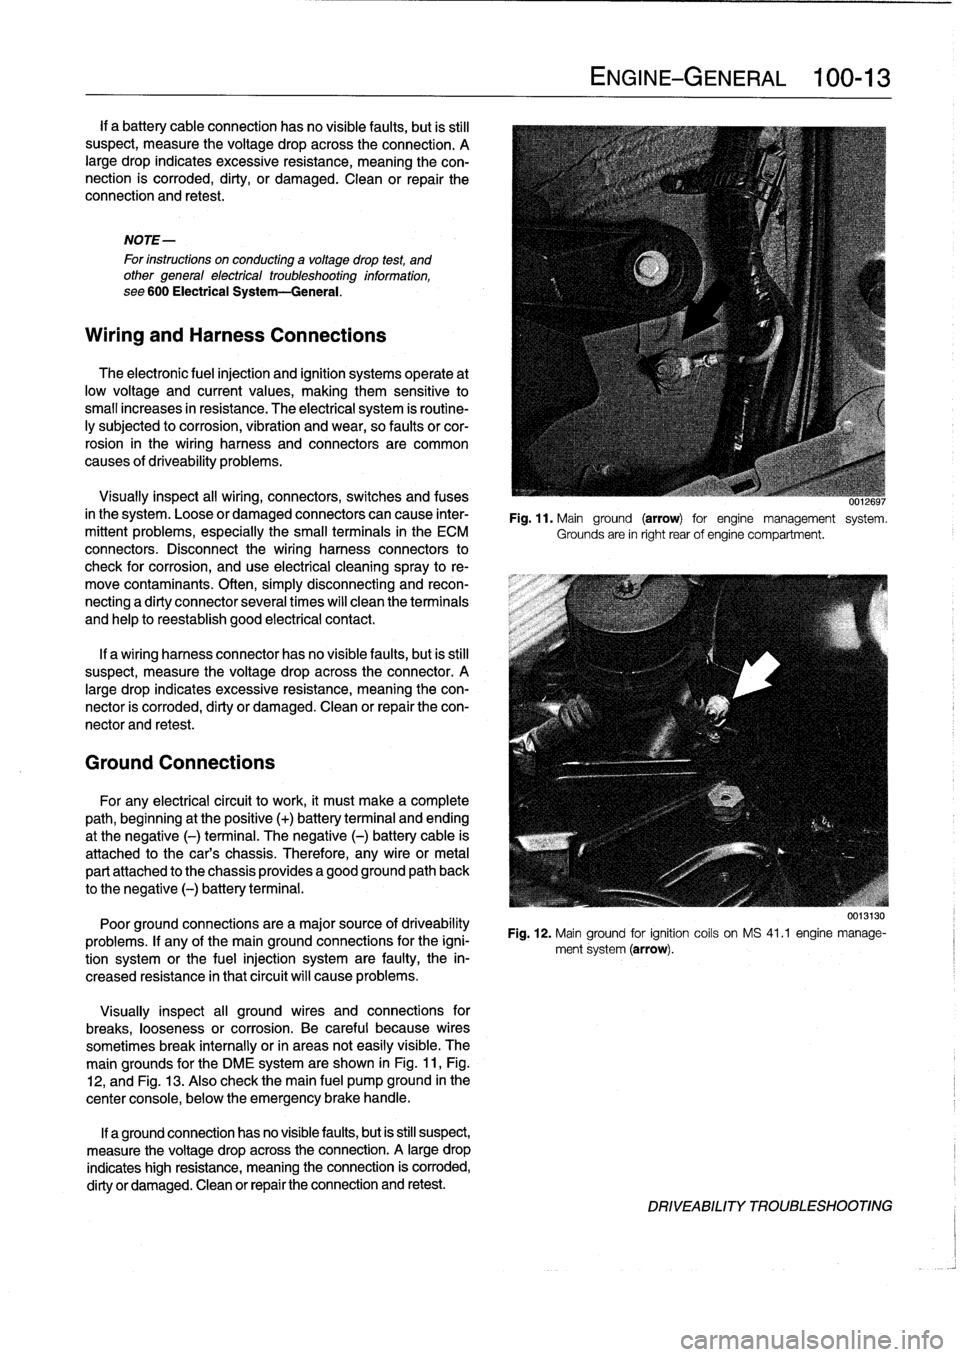 BMW 323i 1998 E36 Workshop Manual 
If
a
battery
cableconnection
hasno
visible
faults,
but
is
still
suspect,
measure
the
voltage
drop
across
the
connection
.
A
large
drop
indicates
excessive
resistance,
meaning
the
con-
nection
is
corr